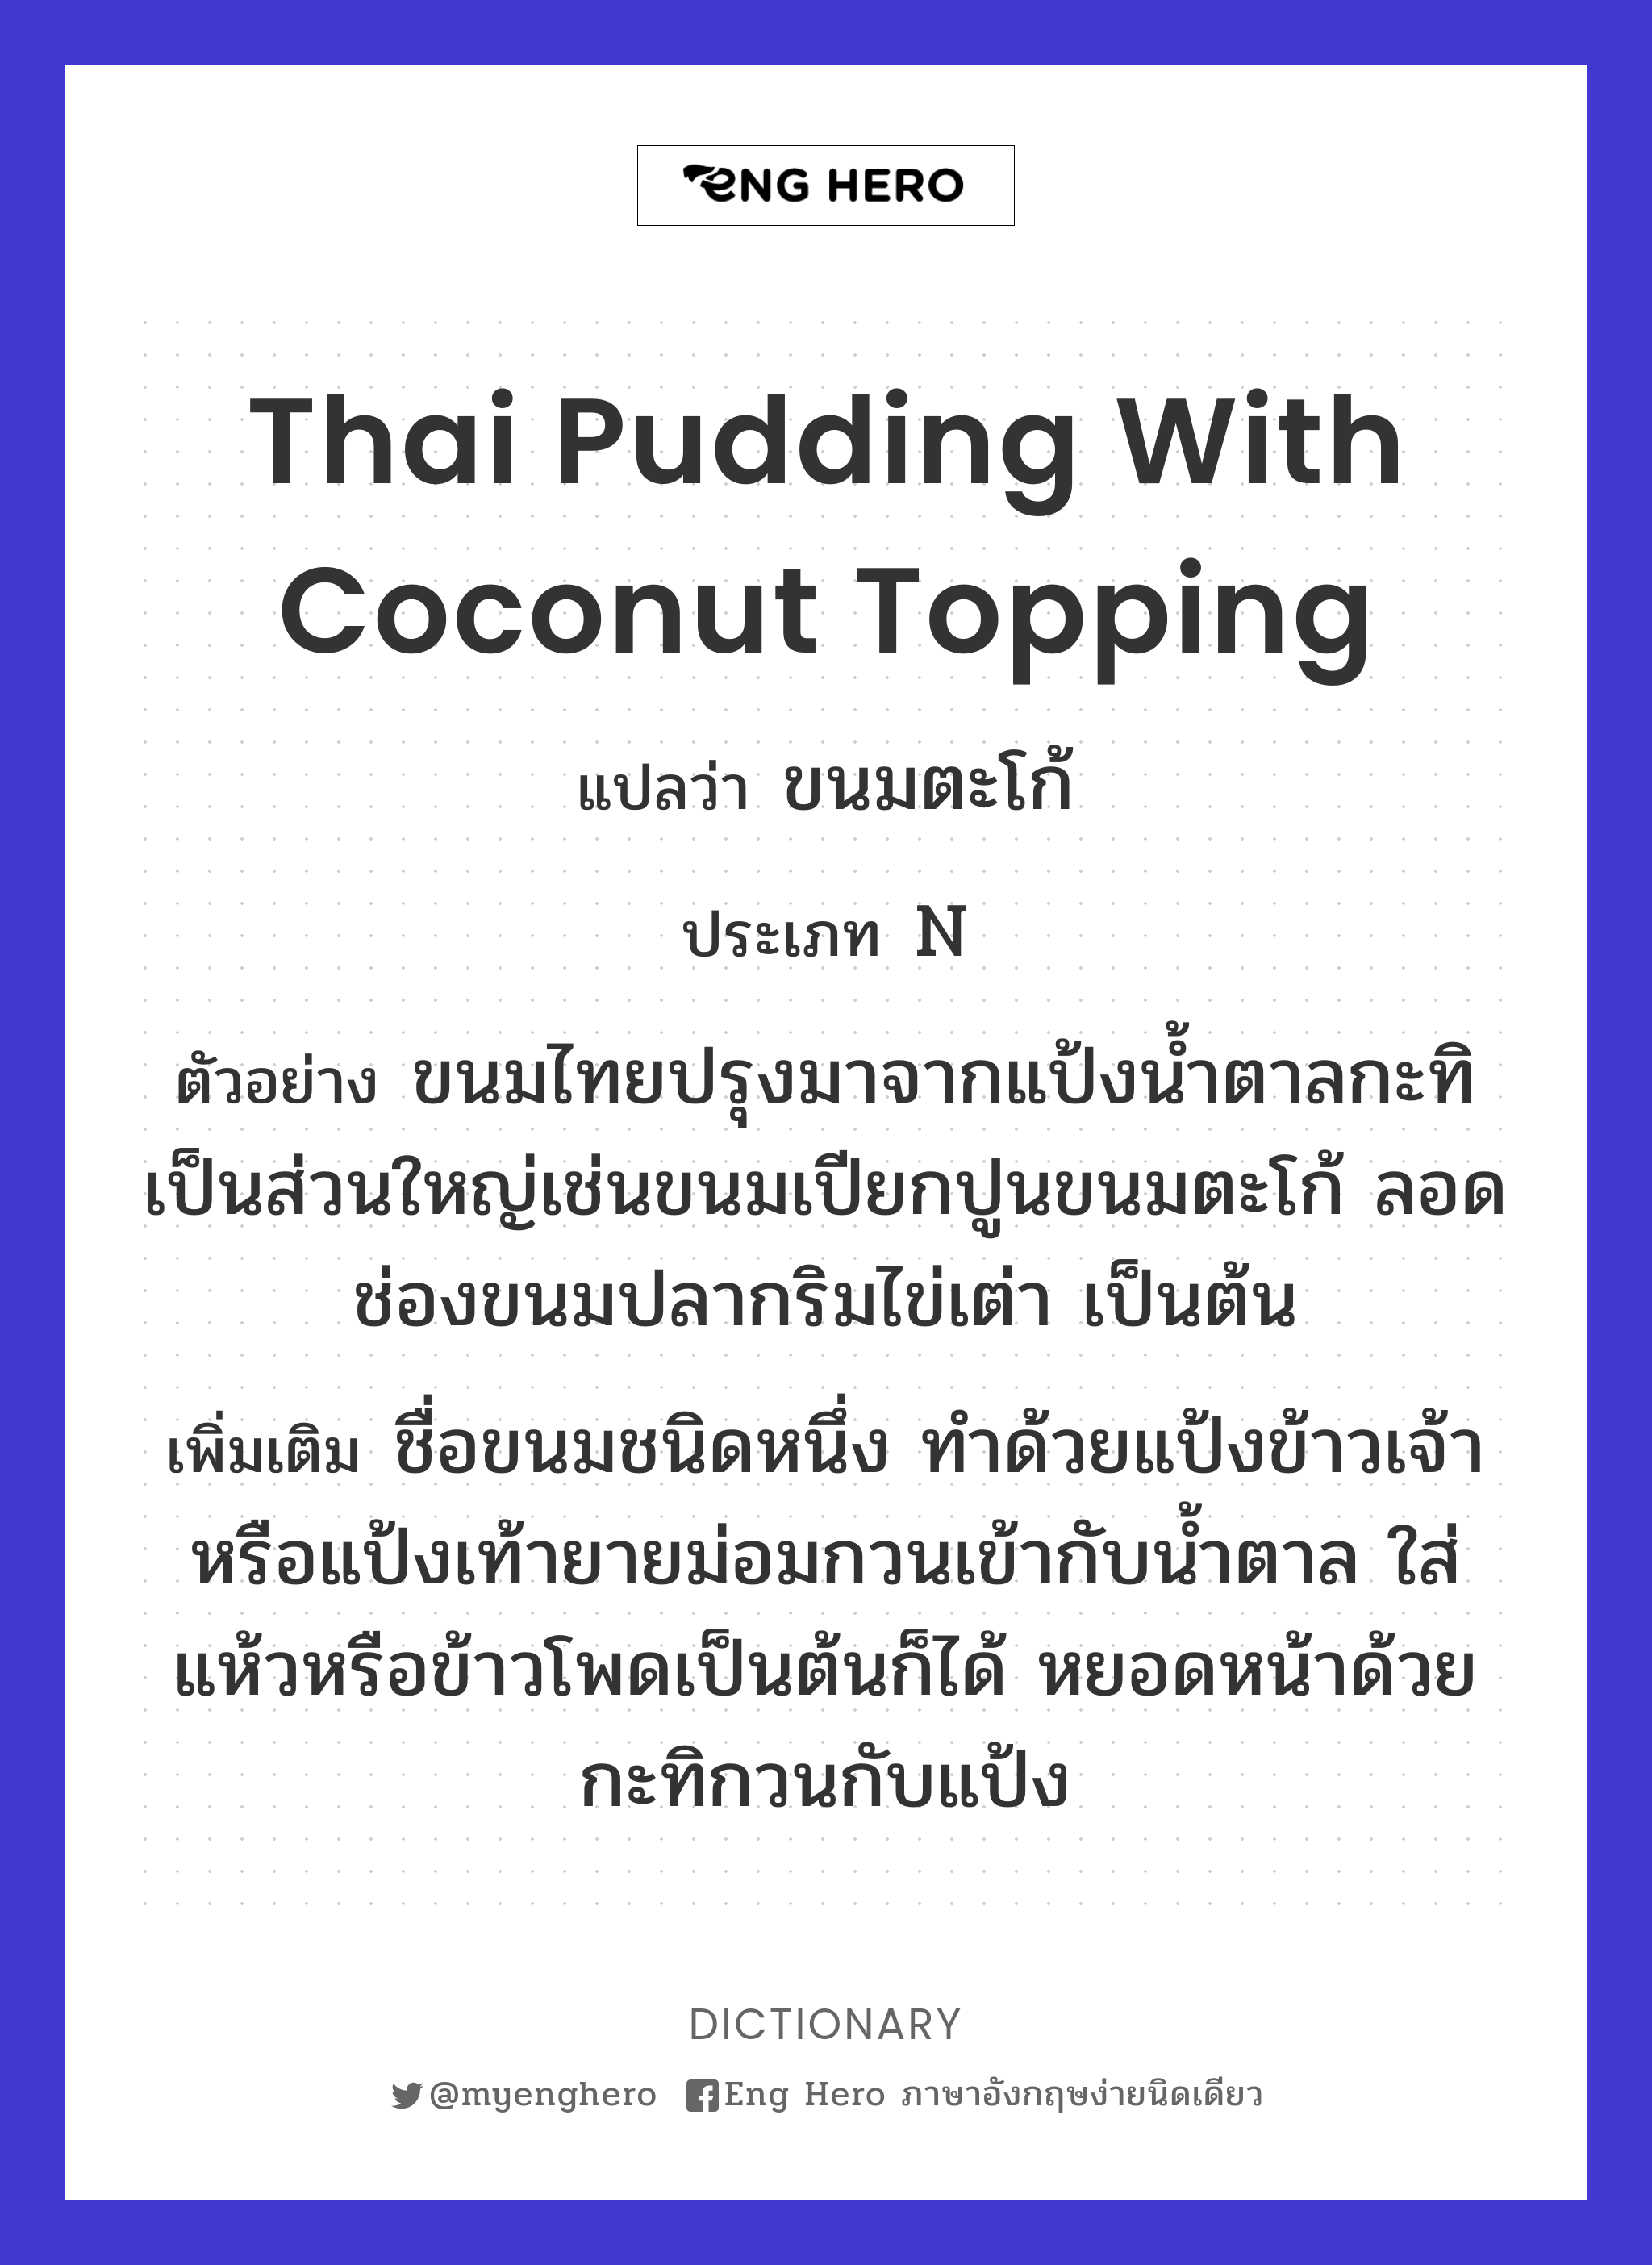 Thai pudding with coconut topping